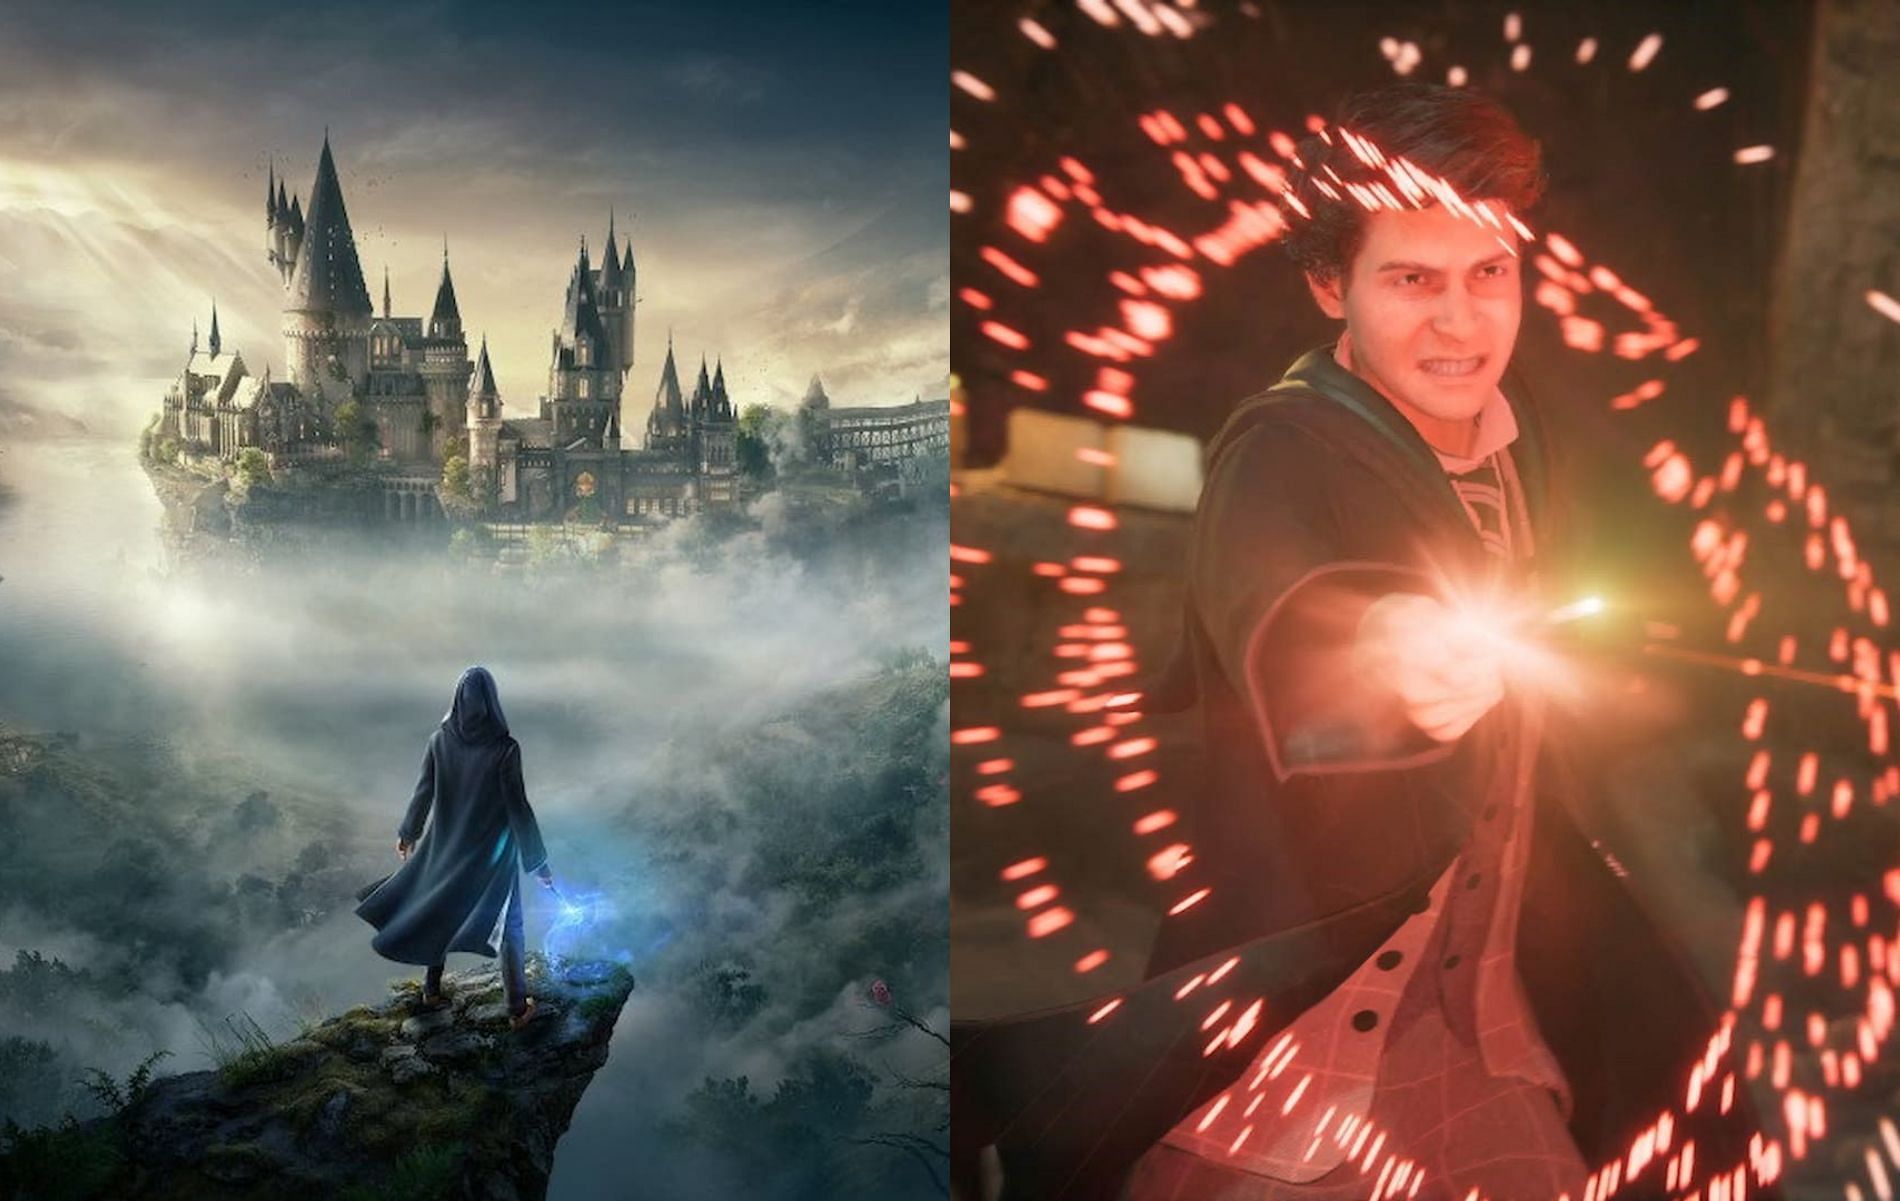 These spells could have been replaced with something else (Images via Warner Bros Interactive Entertianment)